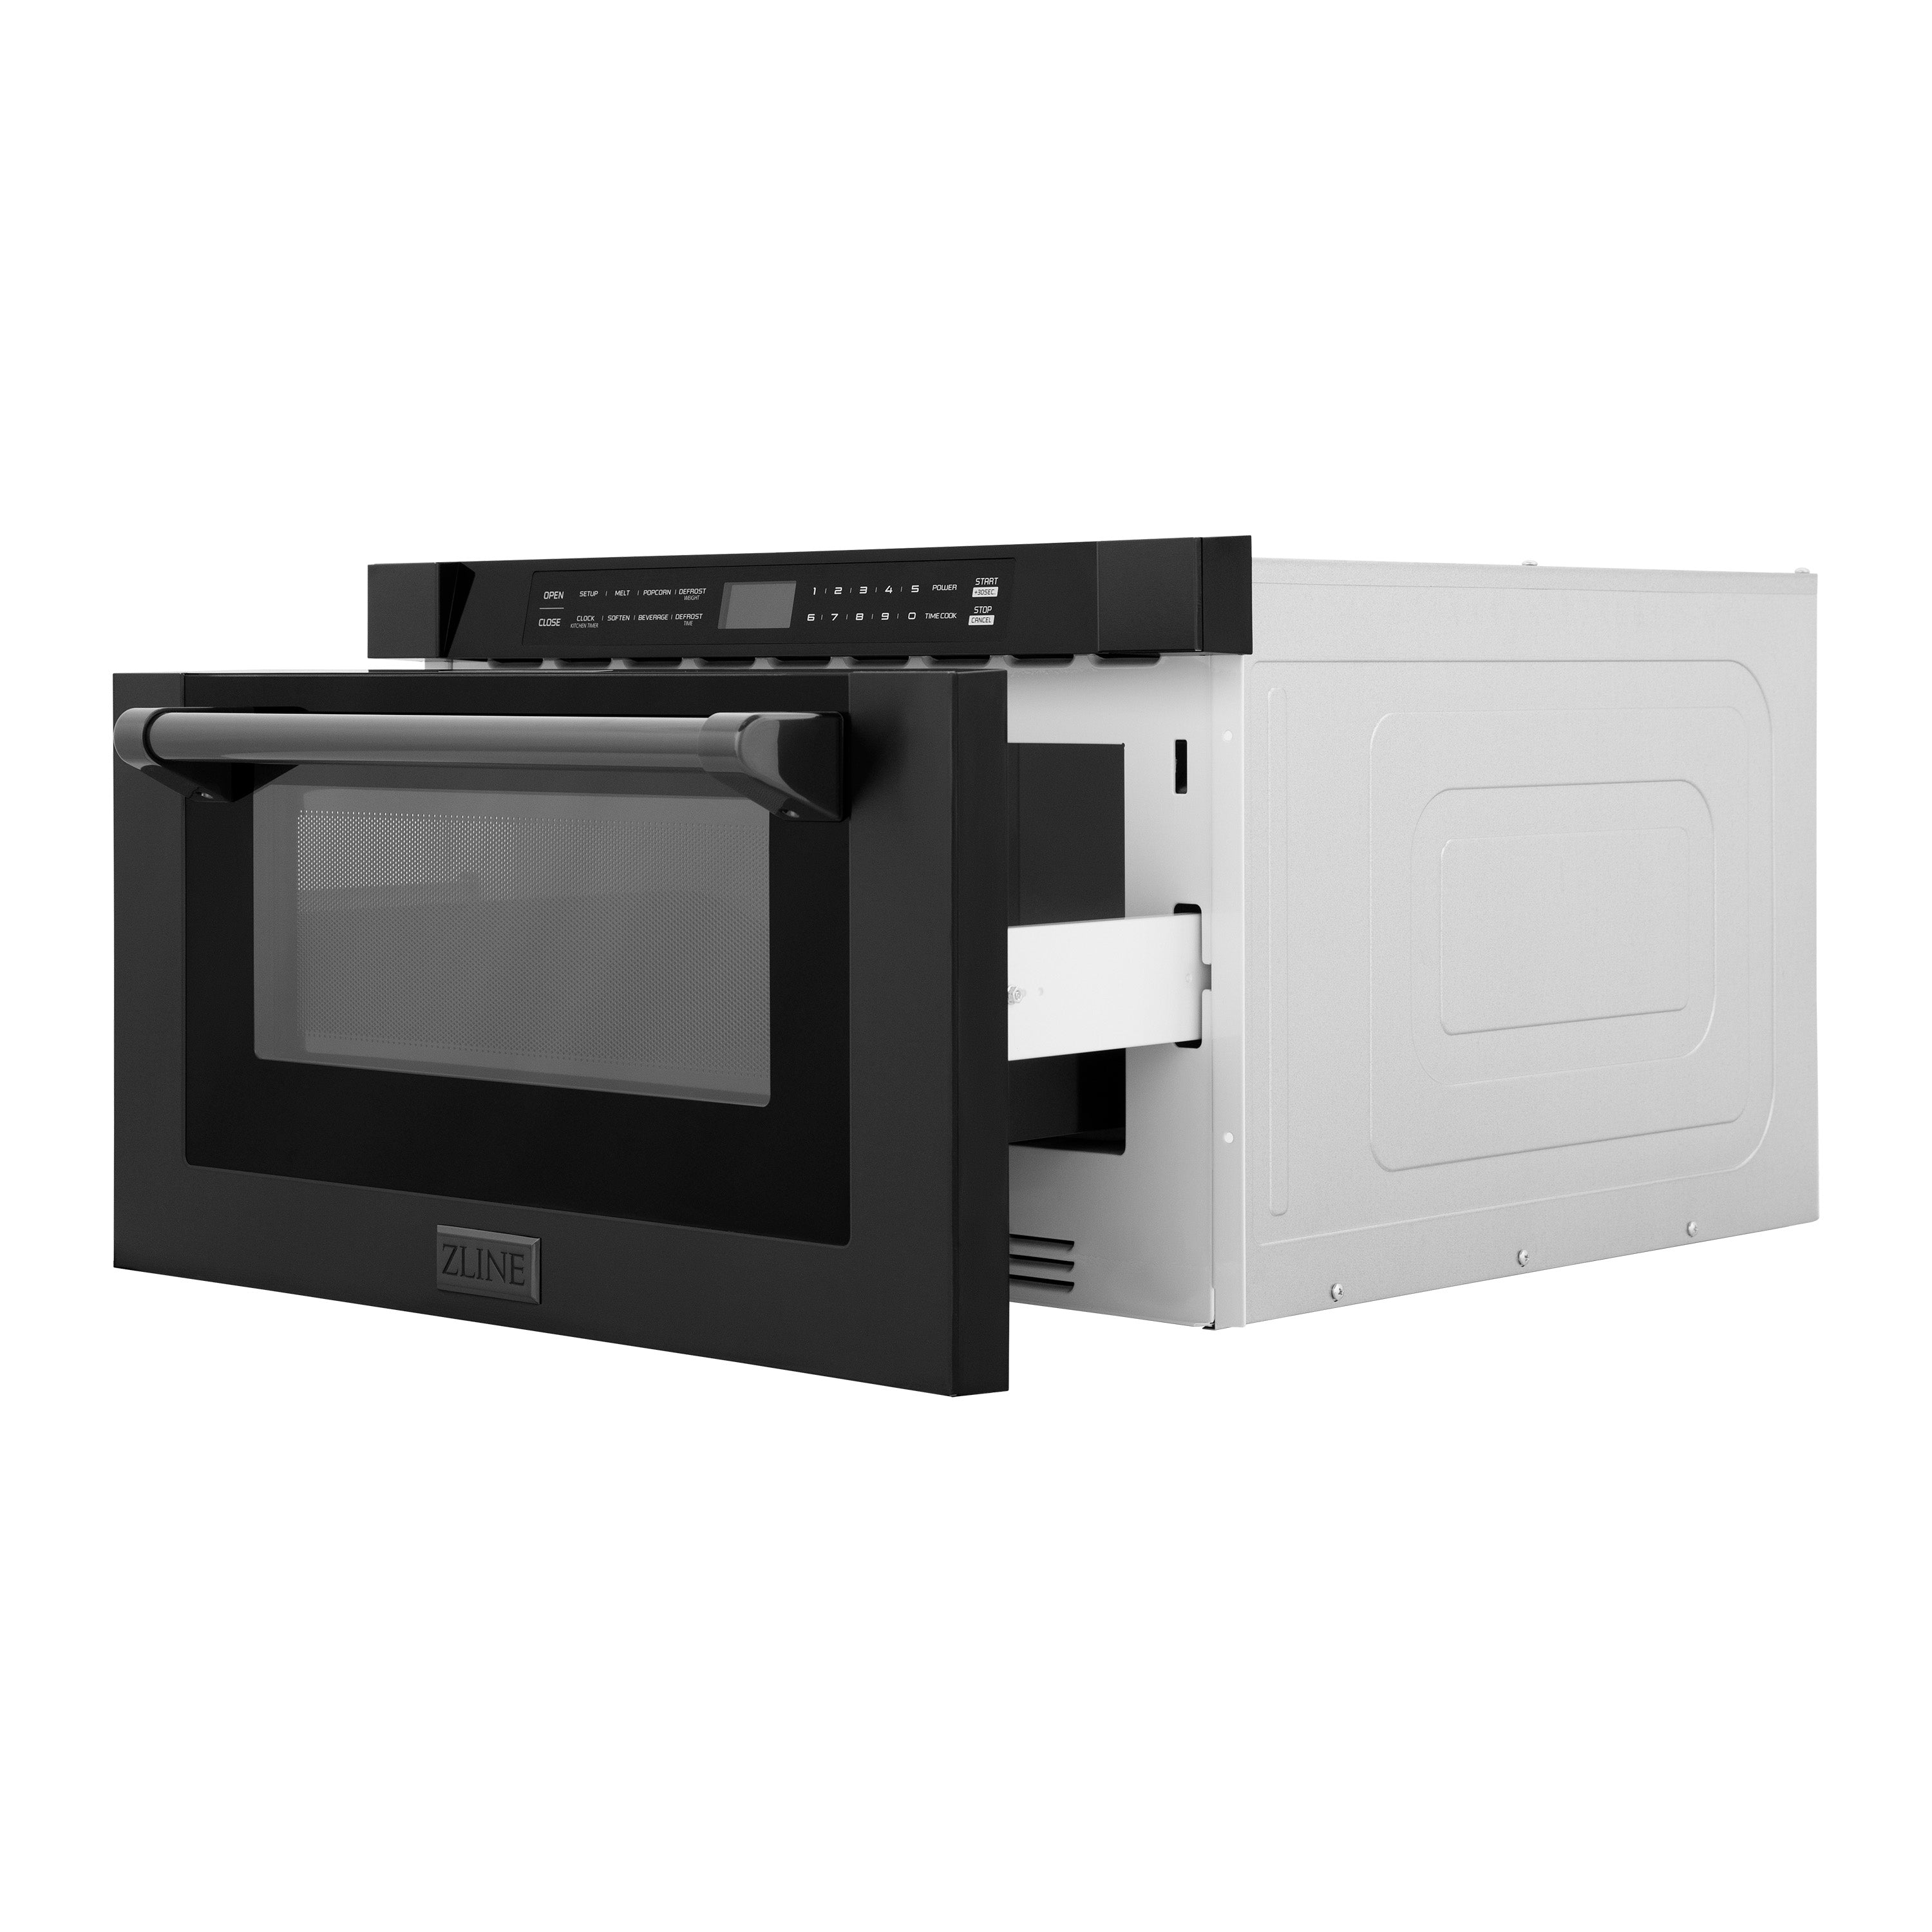 ZLINE 24" 1.2 cu. ft. Built-in Microwave Drawer with a Traditional Handle in Black Stainless Steel